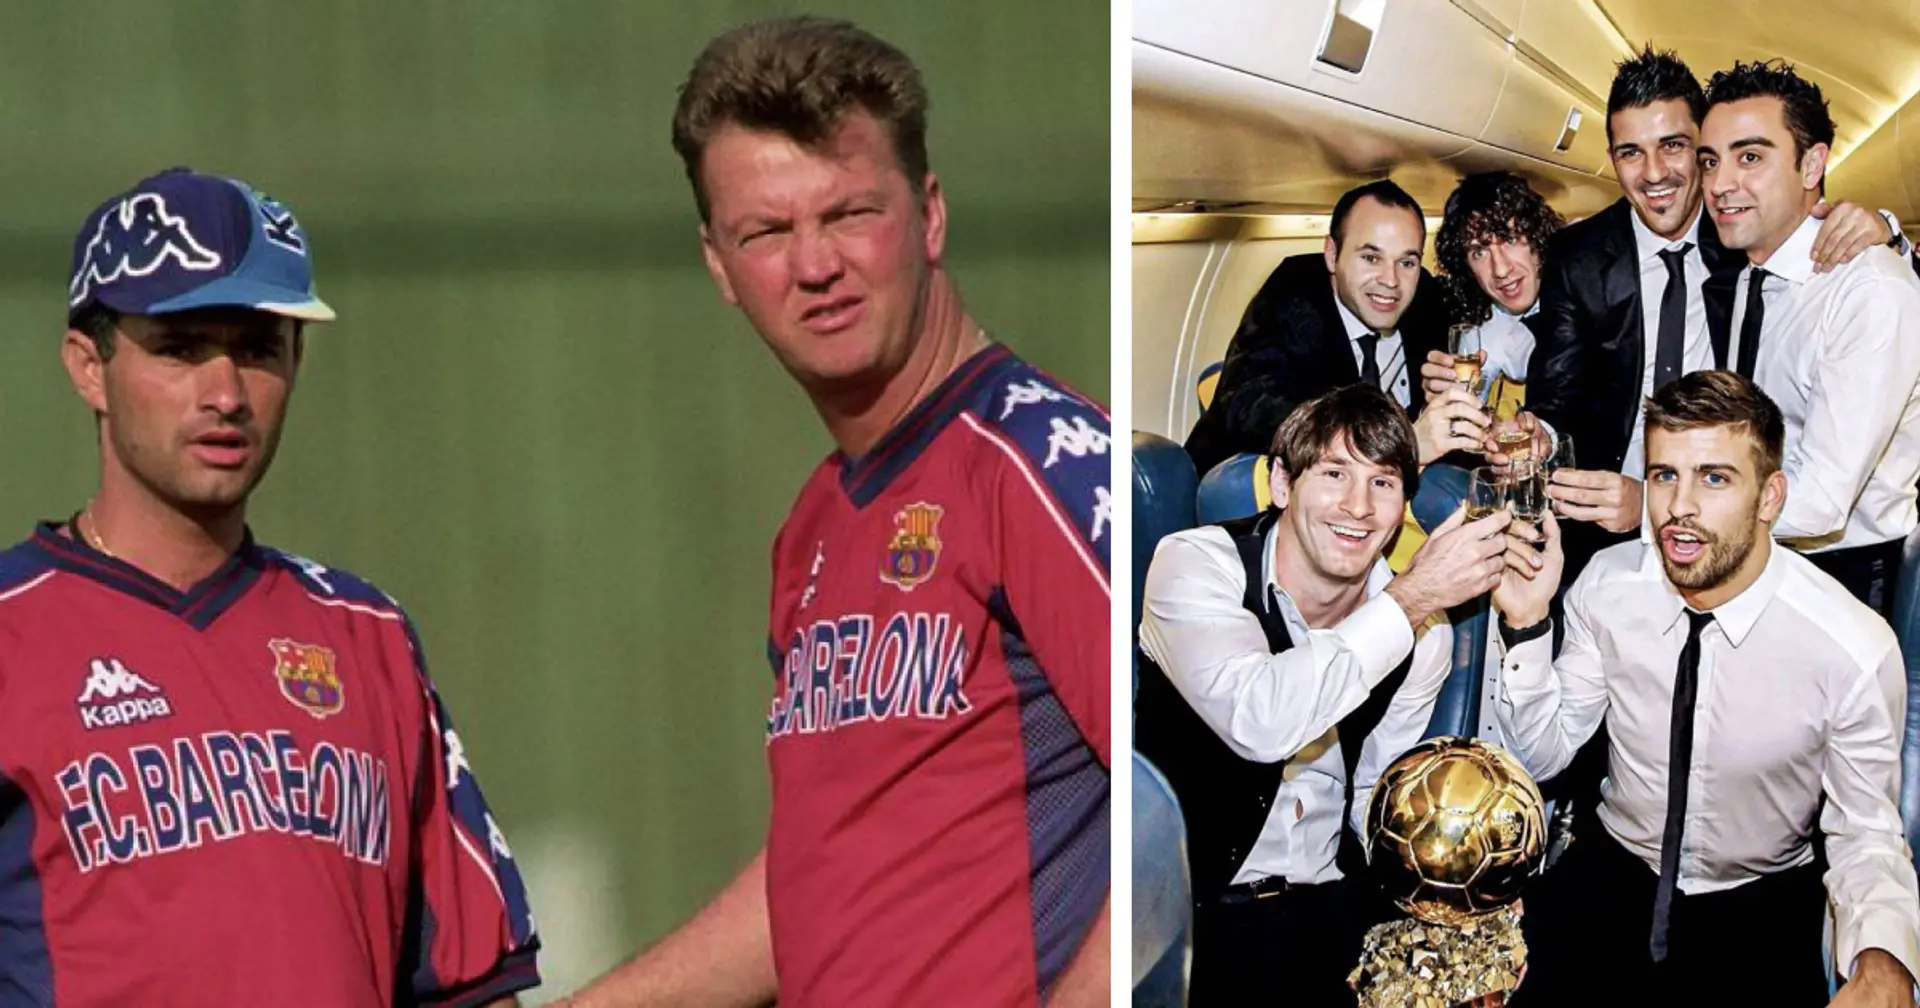 'Not strong enough': Louis van Gaal’s verdict on 12-year-old kid who'd grow up to become Barca legend